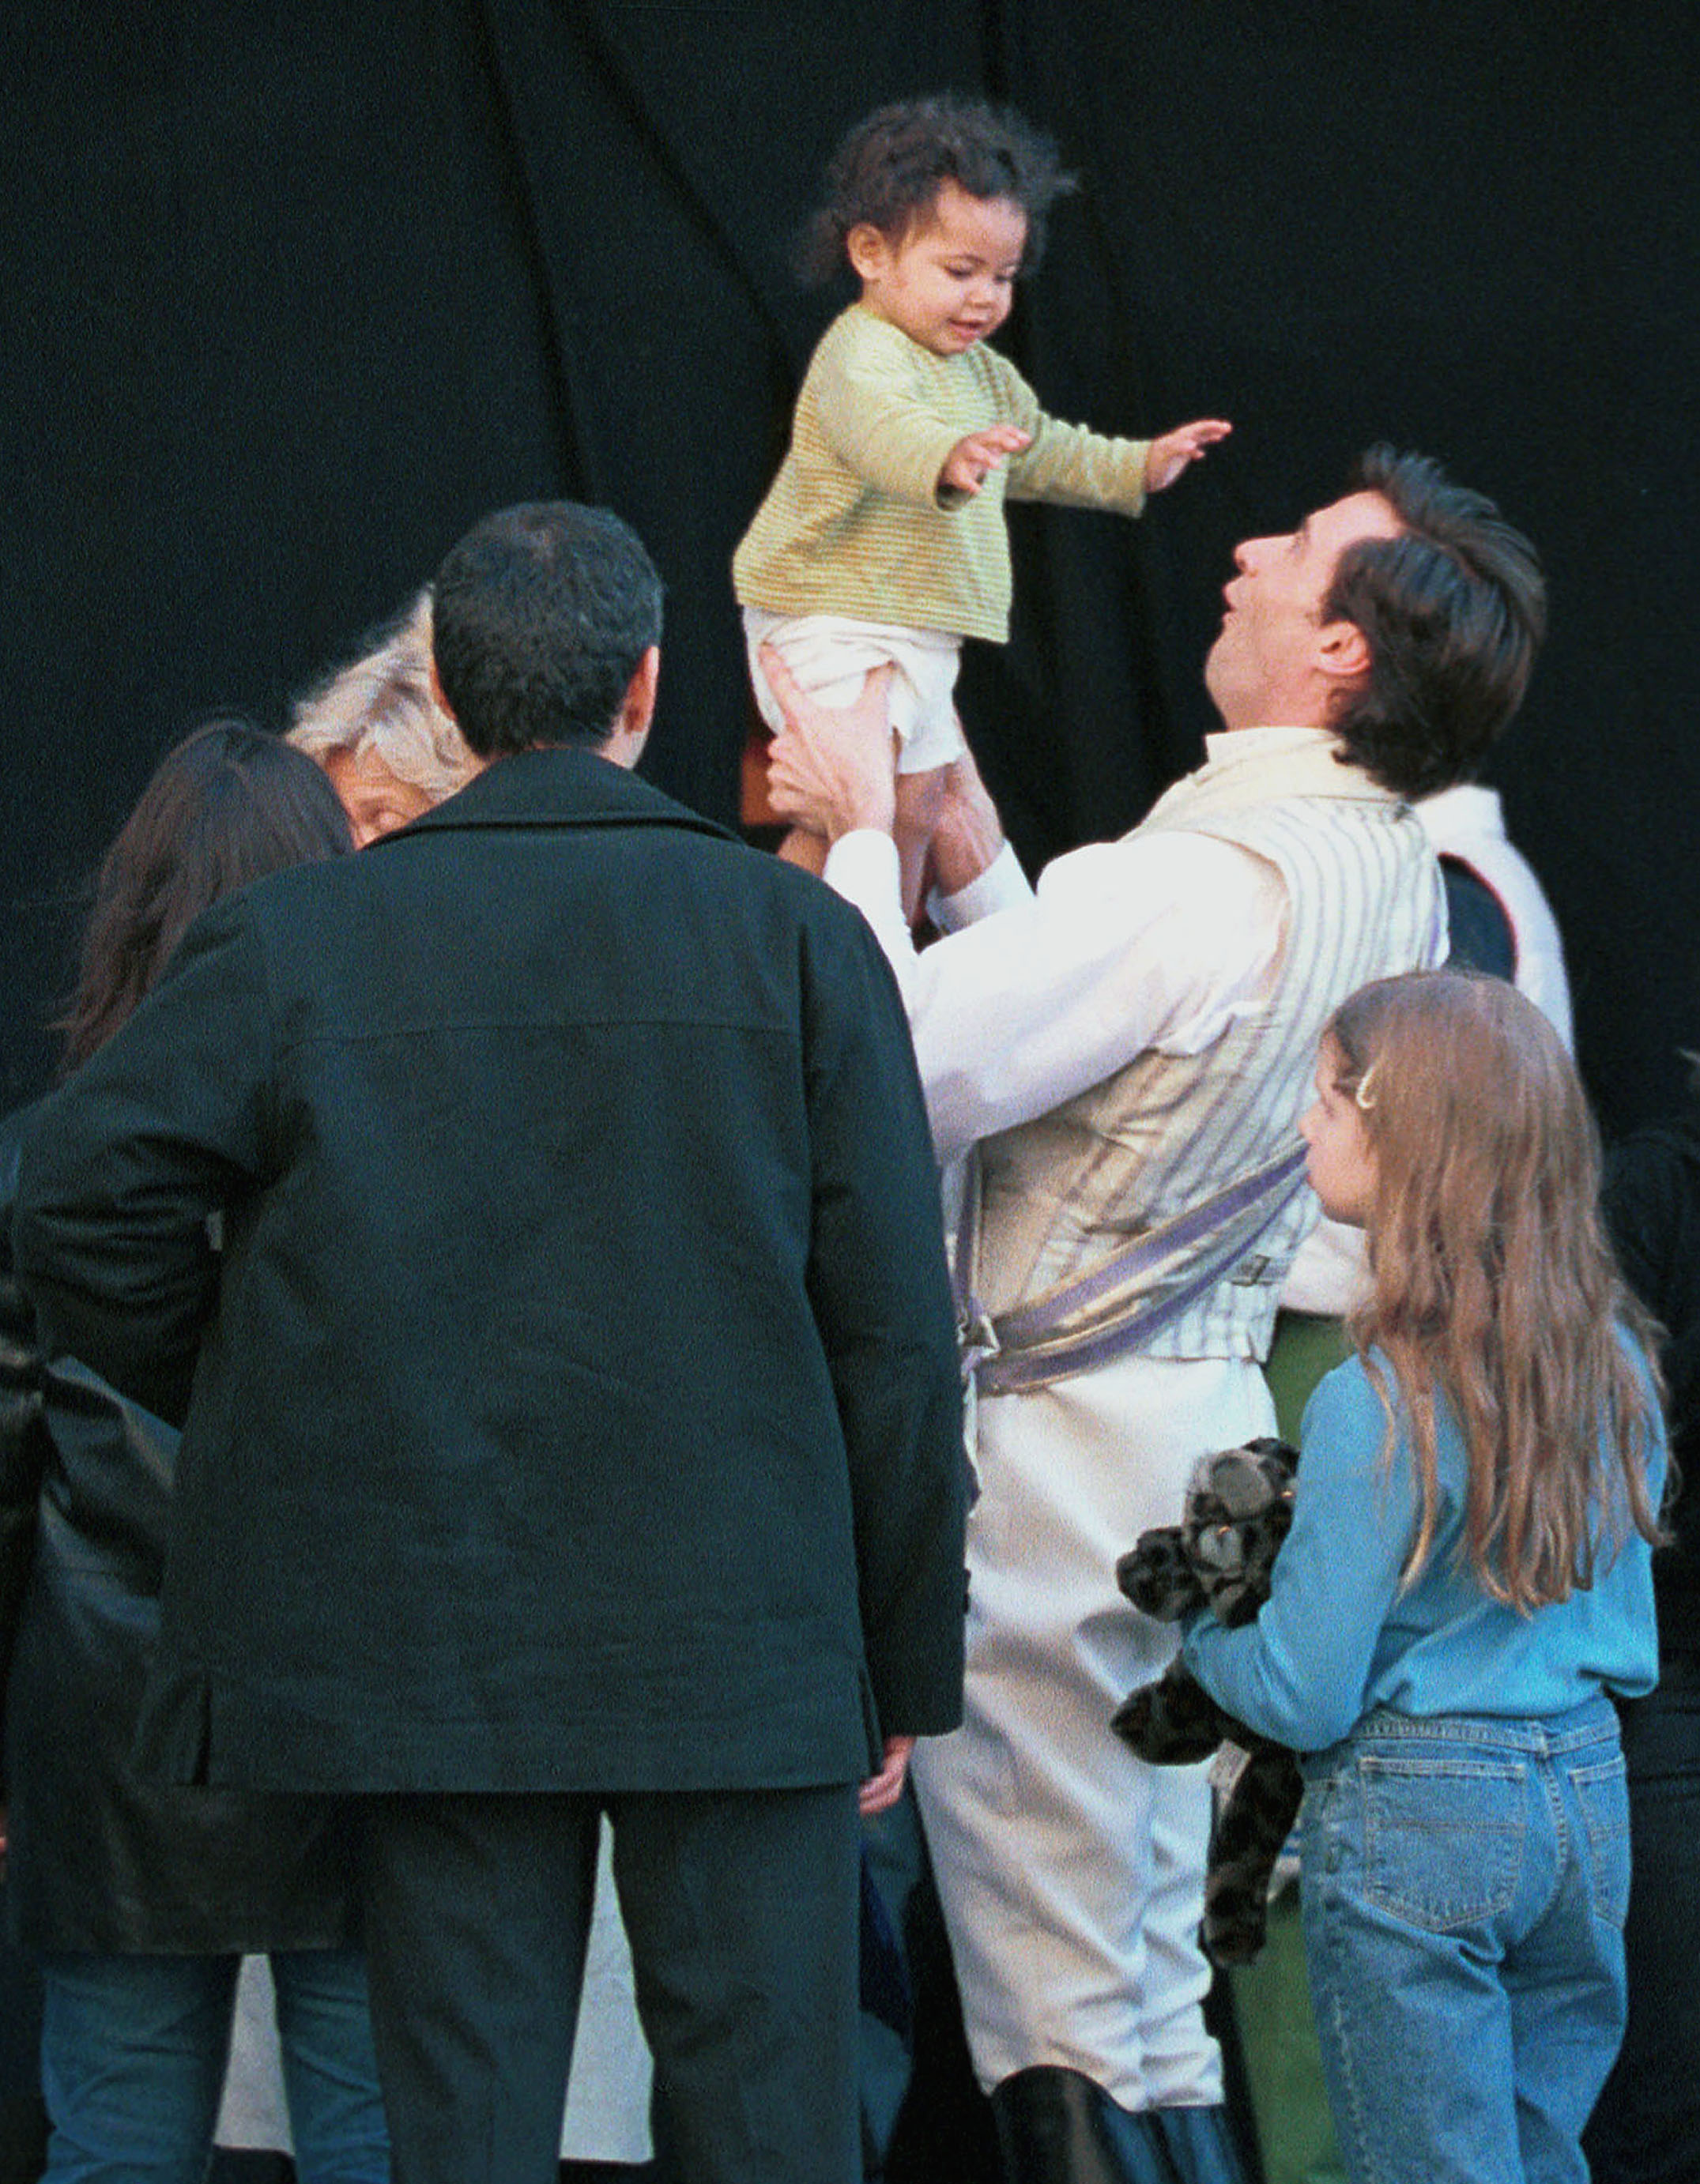 Hugh Jackman plays with Oscar Maximilian on the movie set of "Kate and Leopold" in New York City on April 5, 2001 | Source: Getty Images